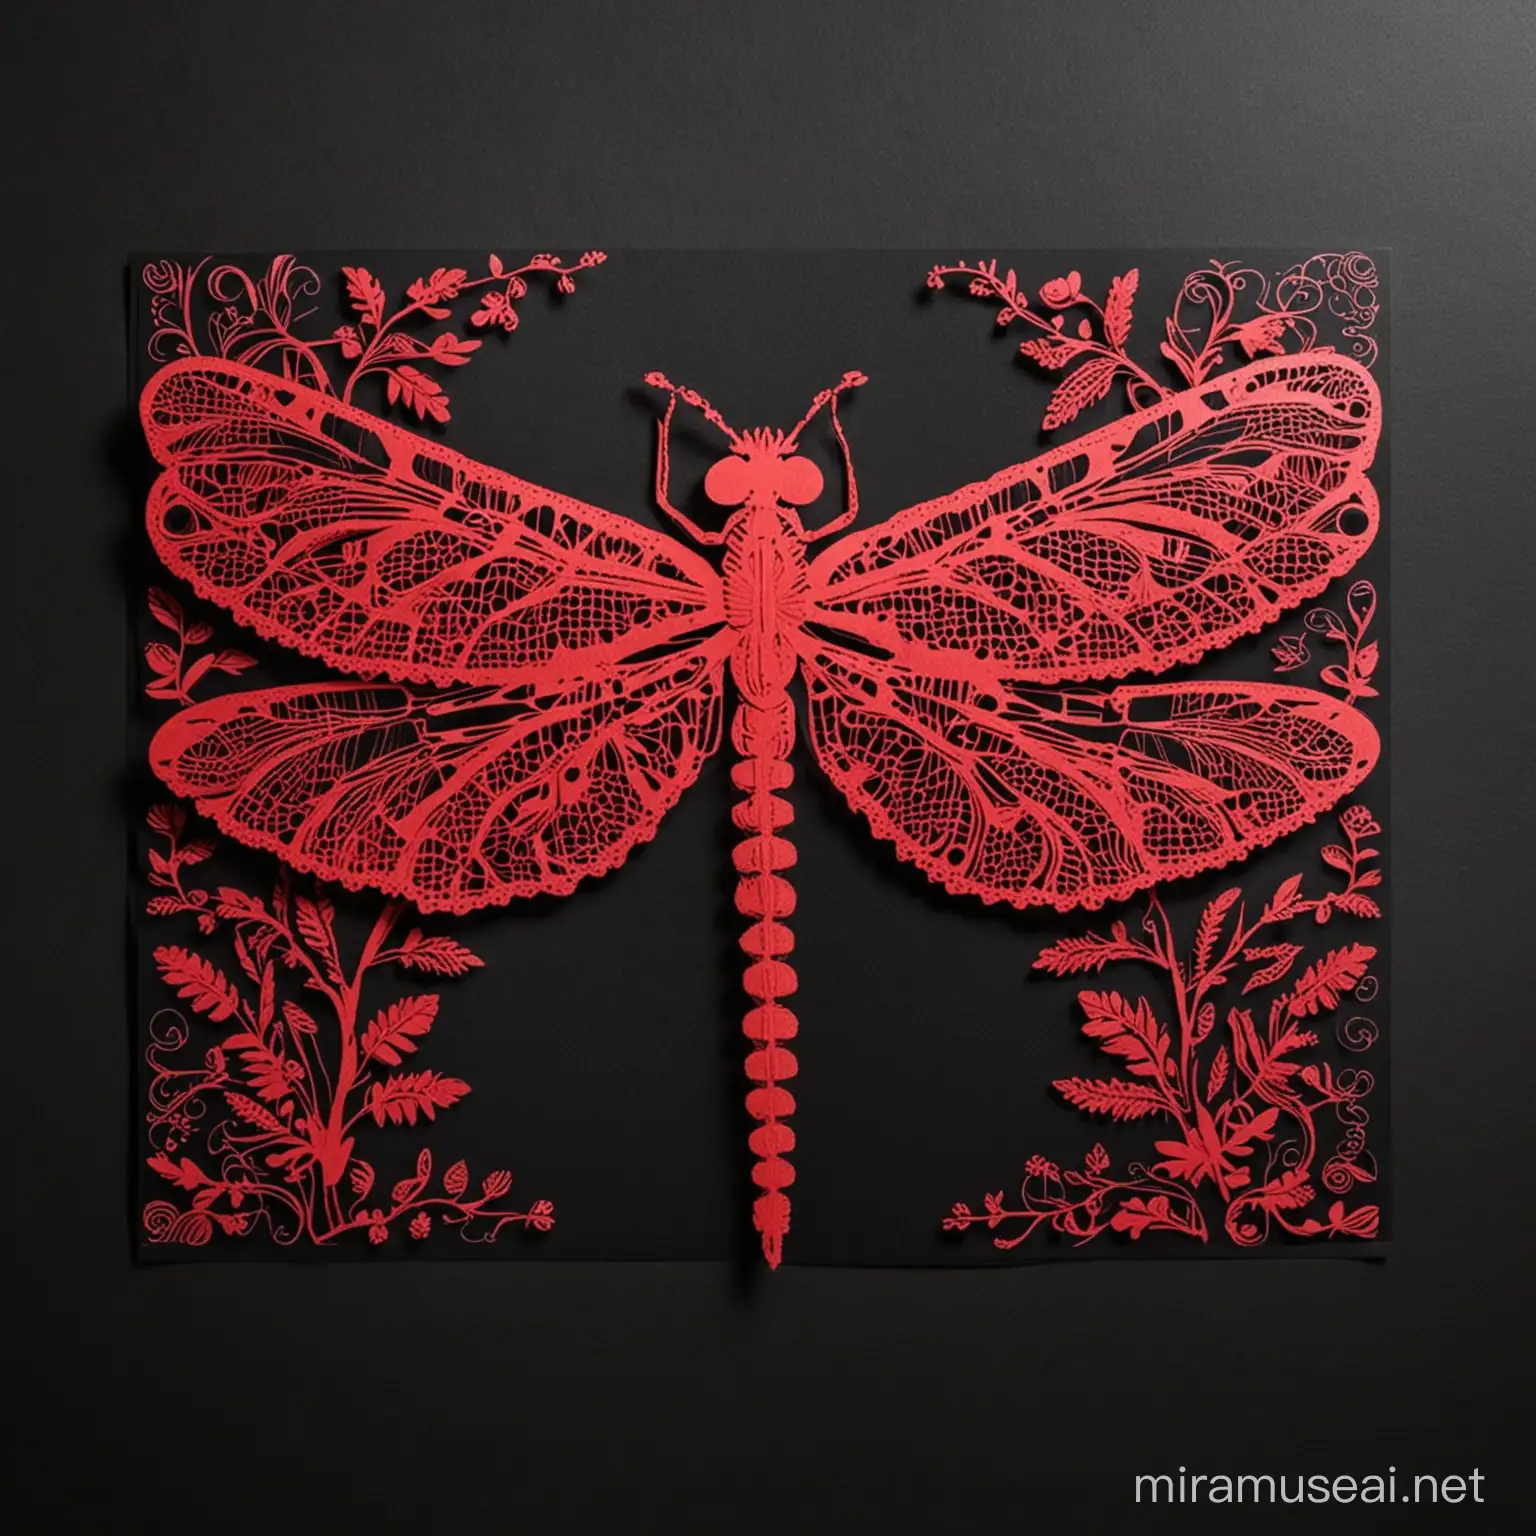 Dragonfly Papel Picado Art Handcut Red Paper on Black Background